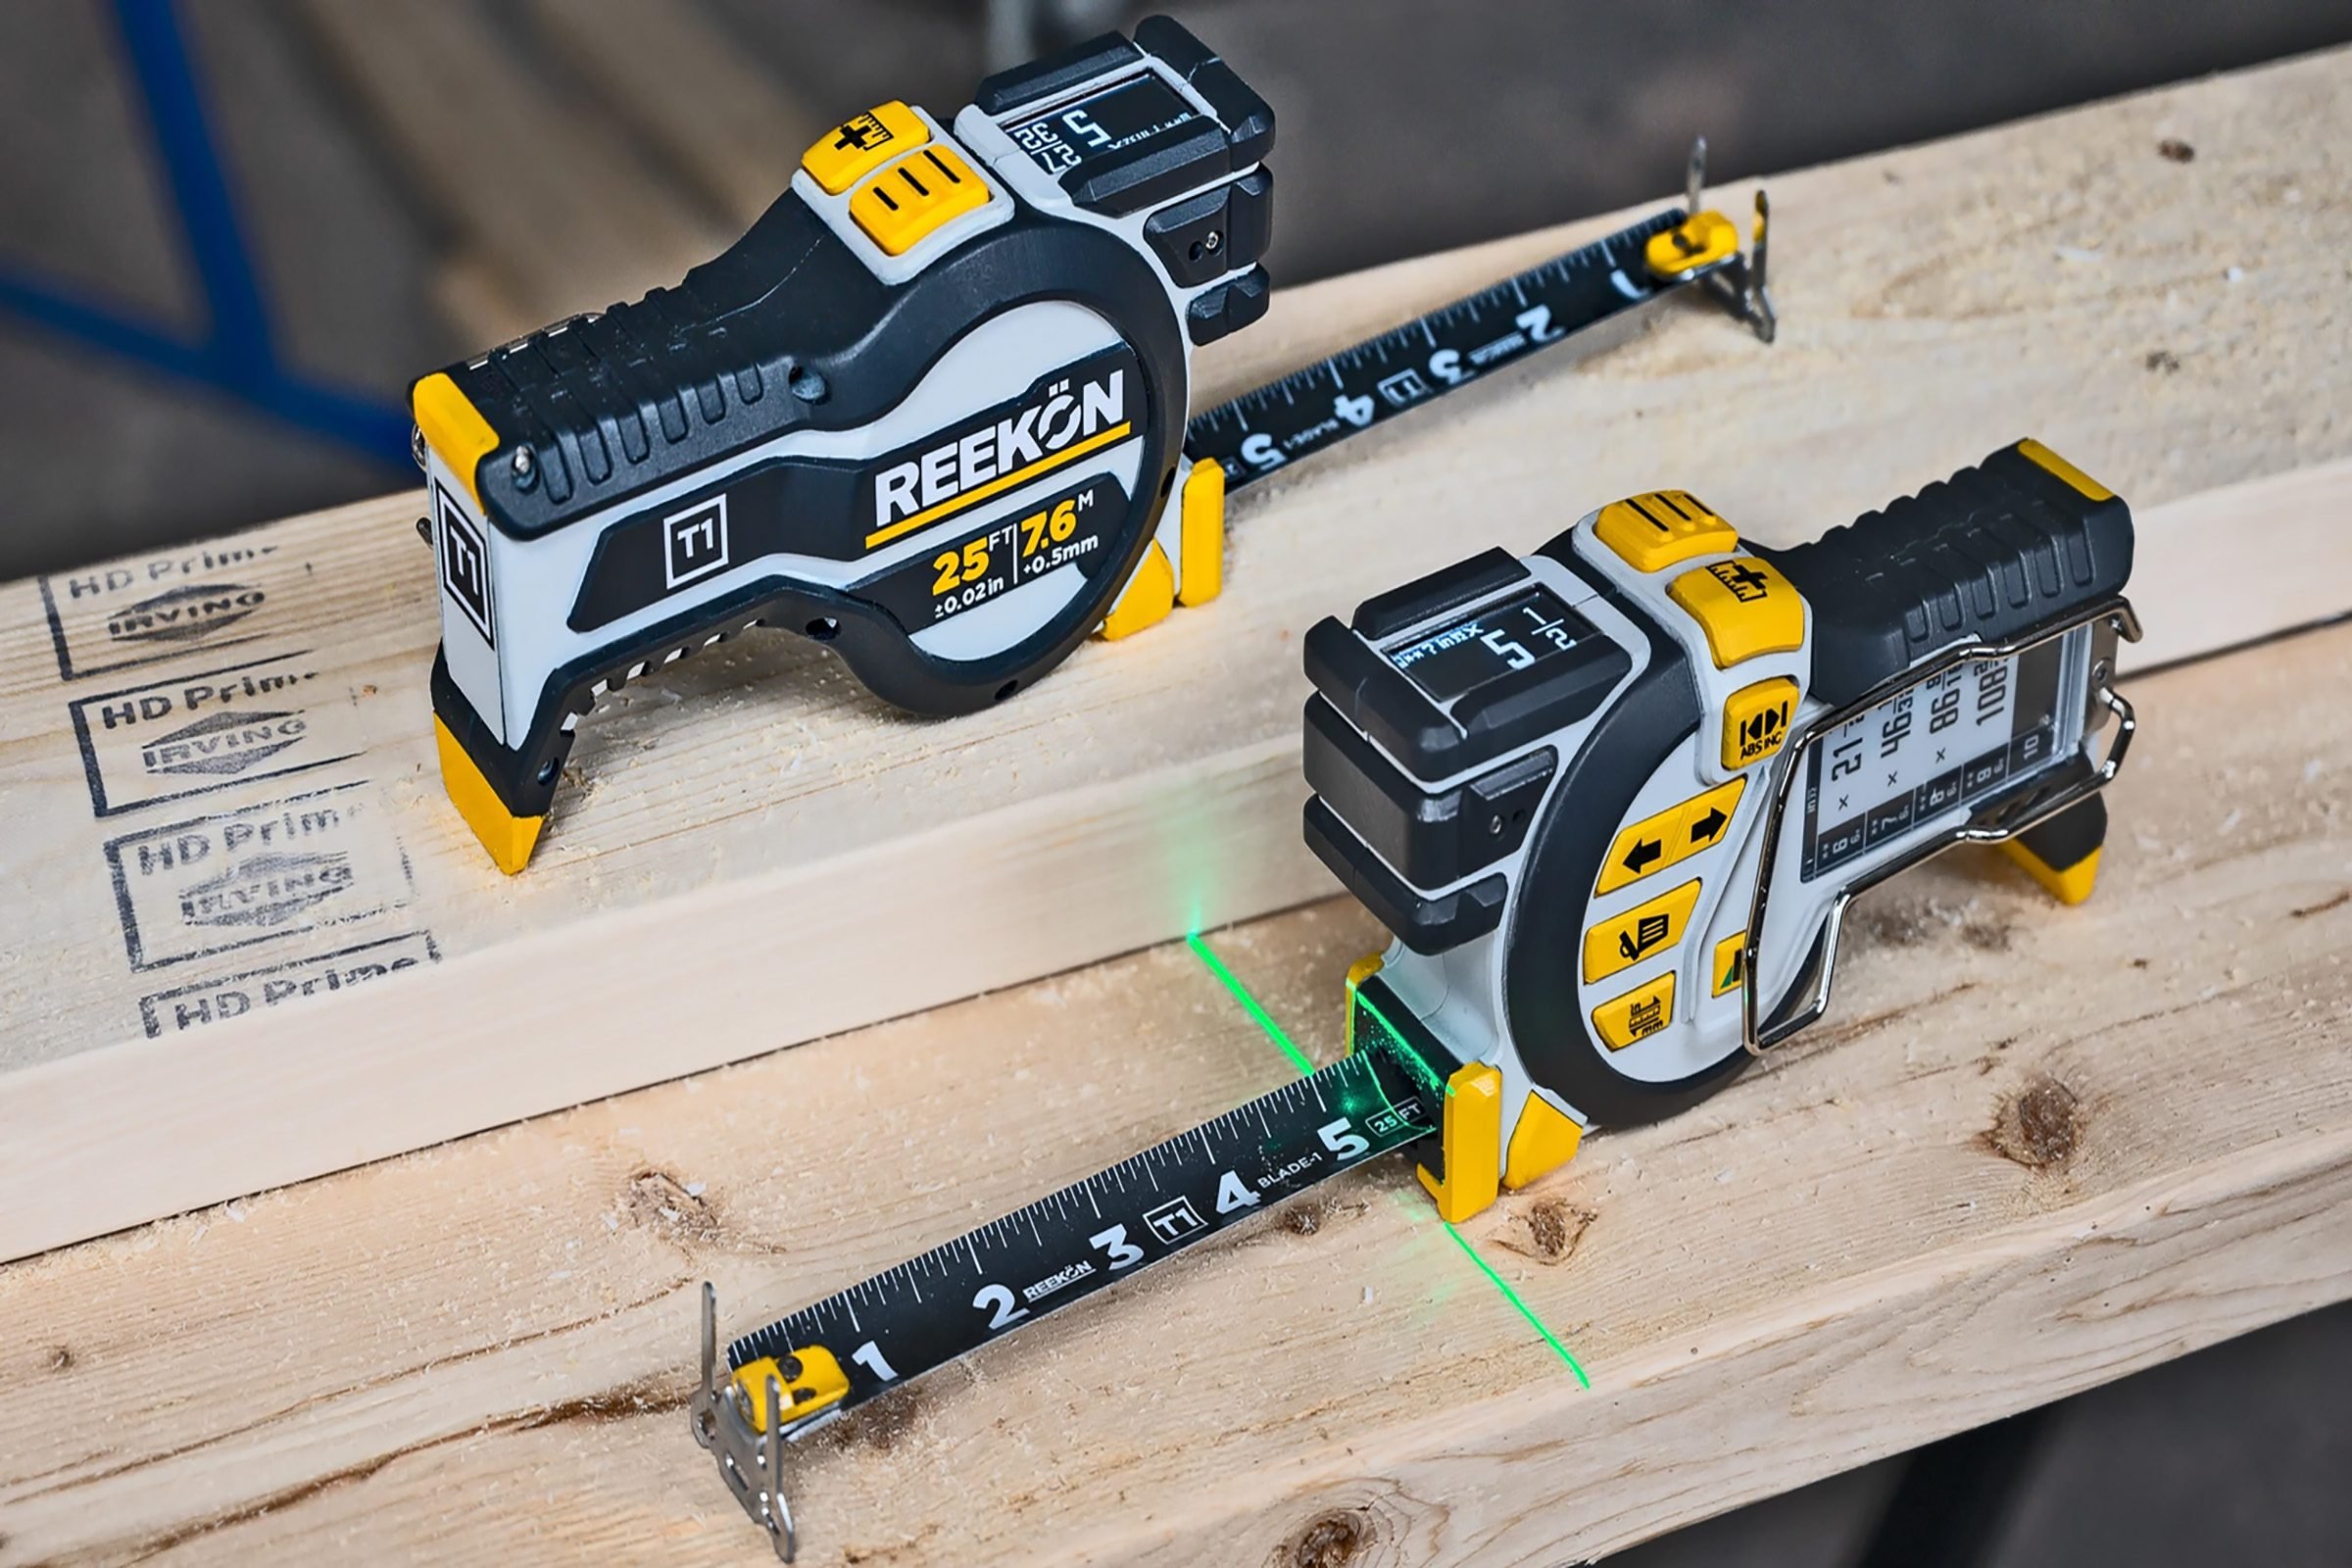 This Digital Tape Measure Makes DIY Projects So Much Easier